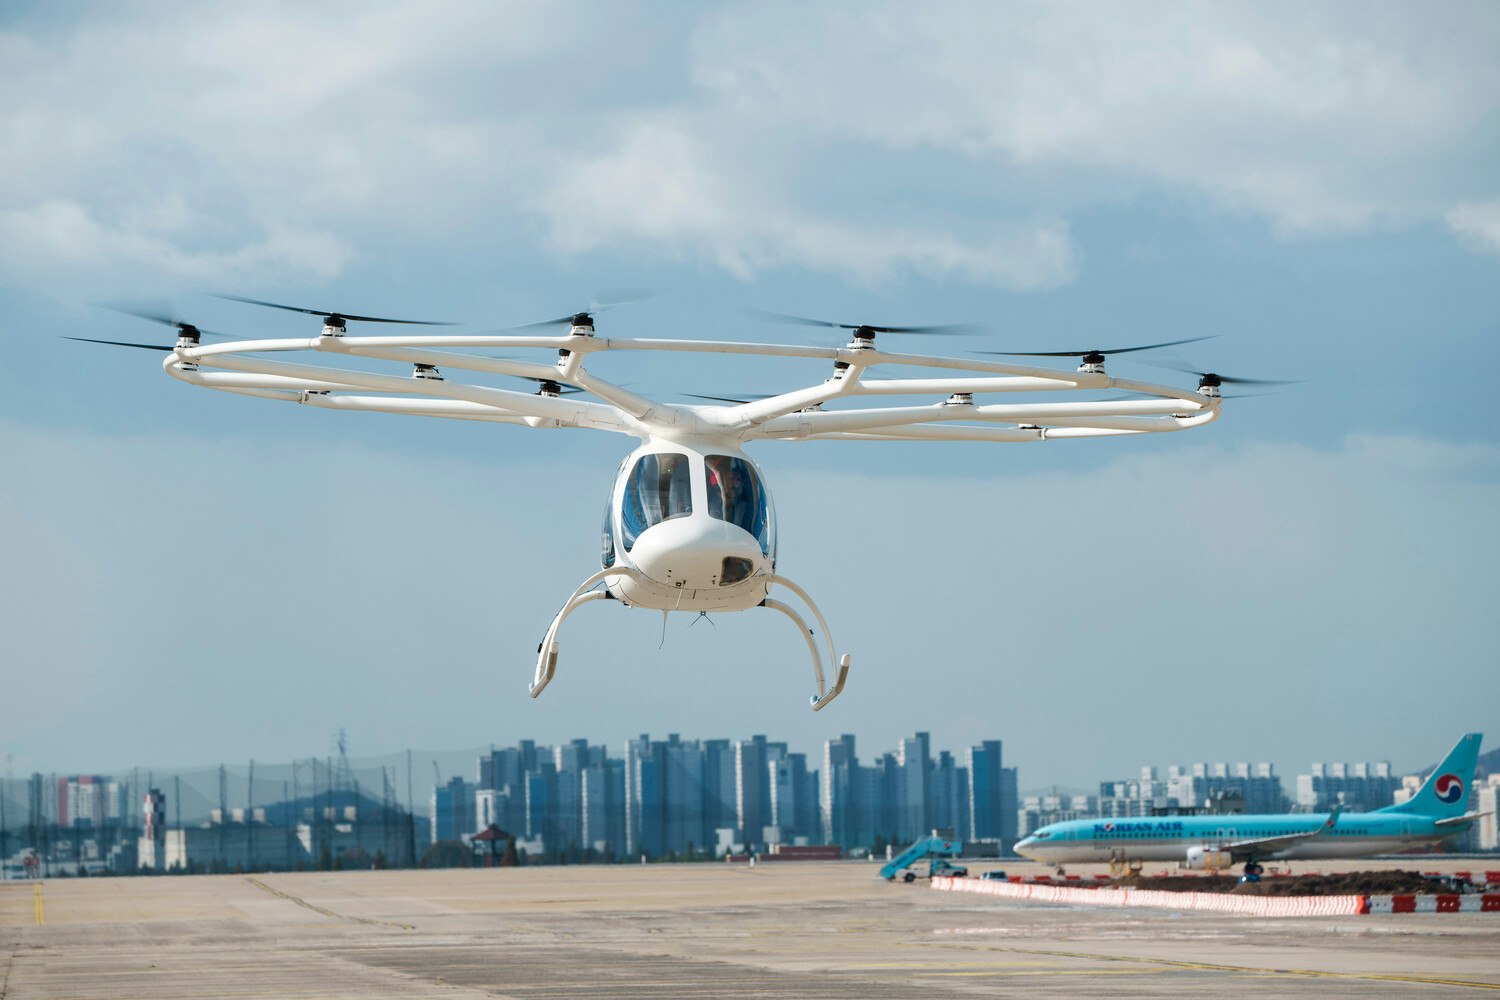 Volocopter 2X takes flight at Gimpo Airport during MOLIT K-UAM Event, Republic of Korea